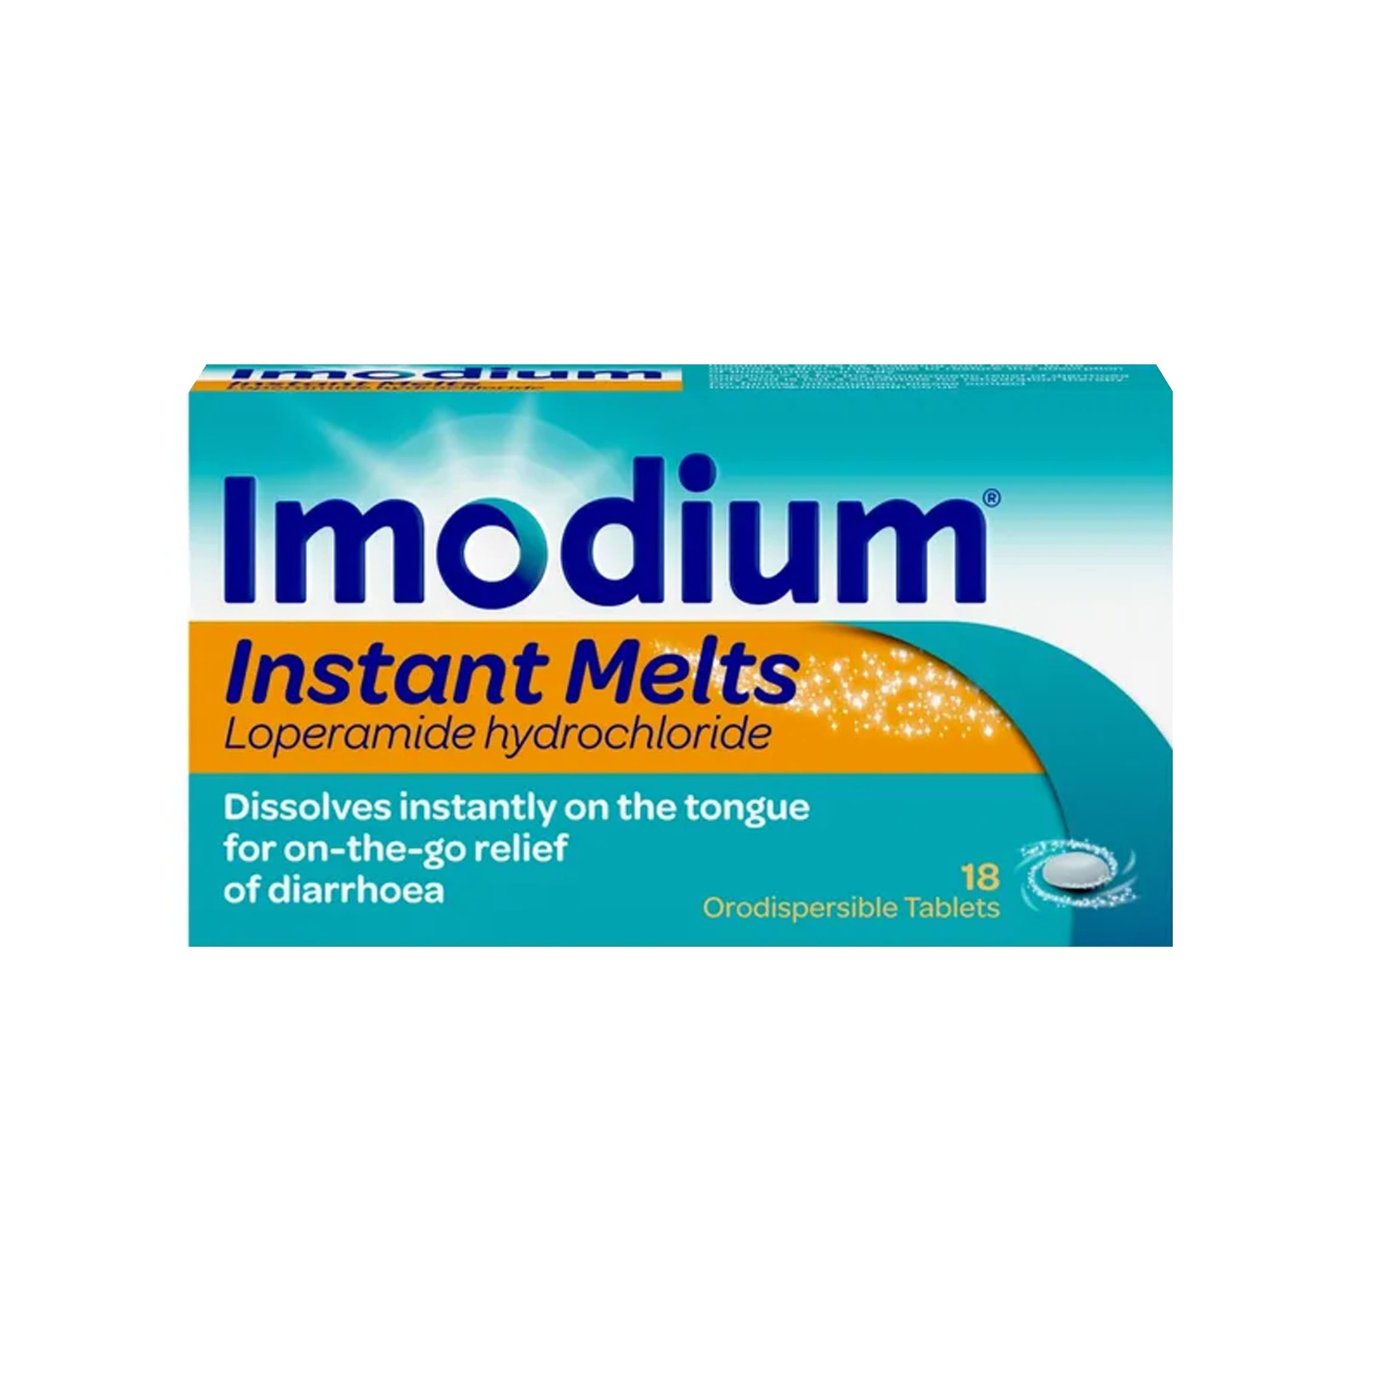 Imodium Instant Melts - 18 Tablets